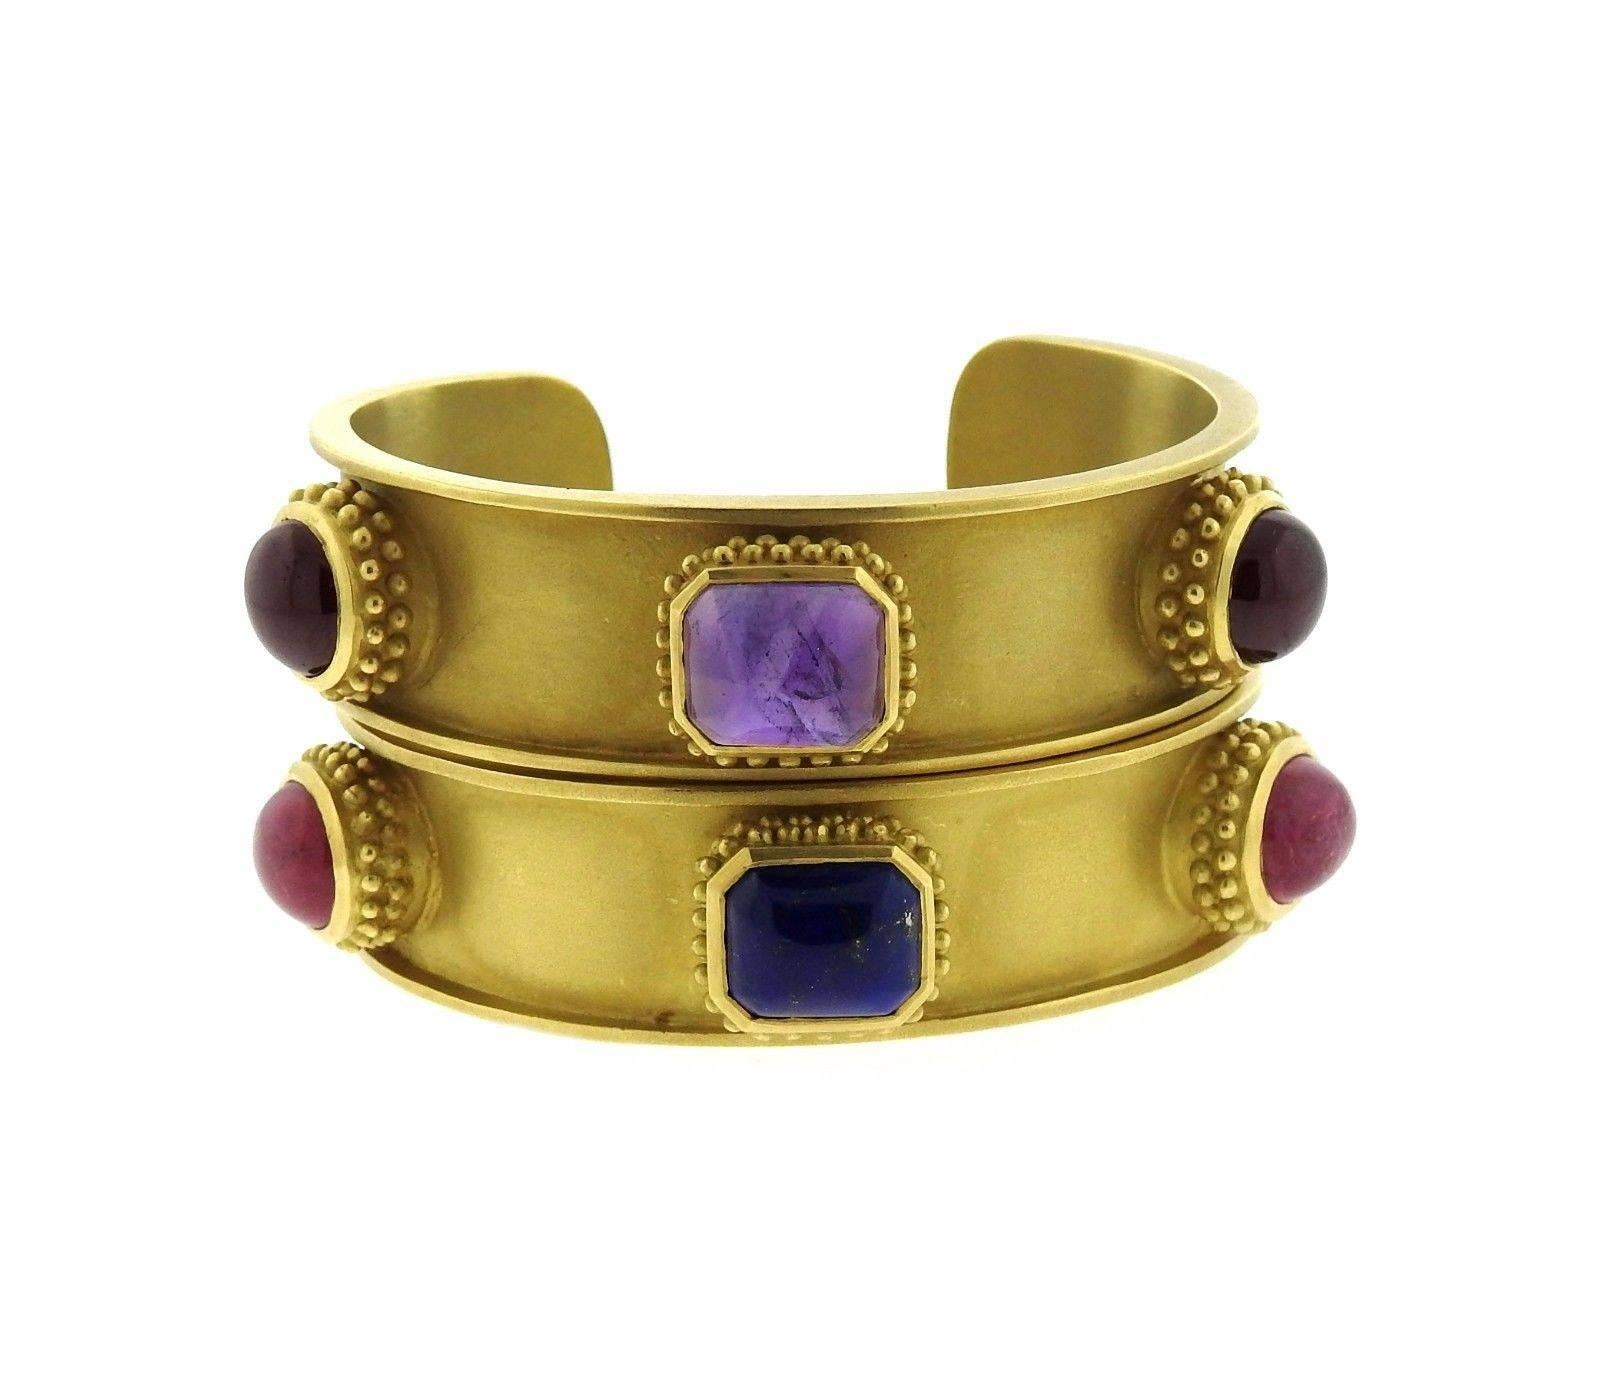 A pair of 18k gold cuff bracelets set with tourmaline, lapis and amethyst.  The bracelets fit a 6.5